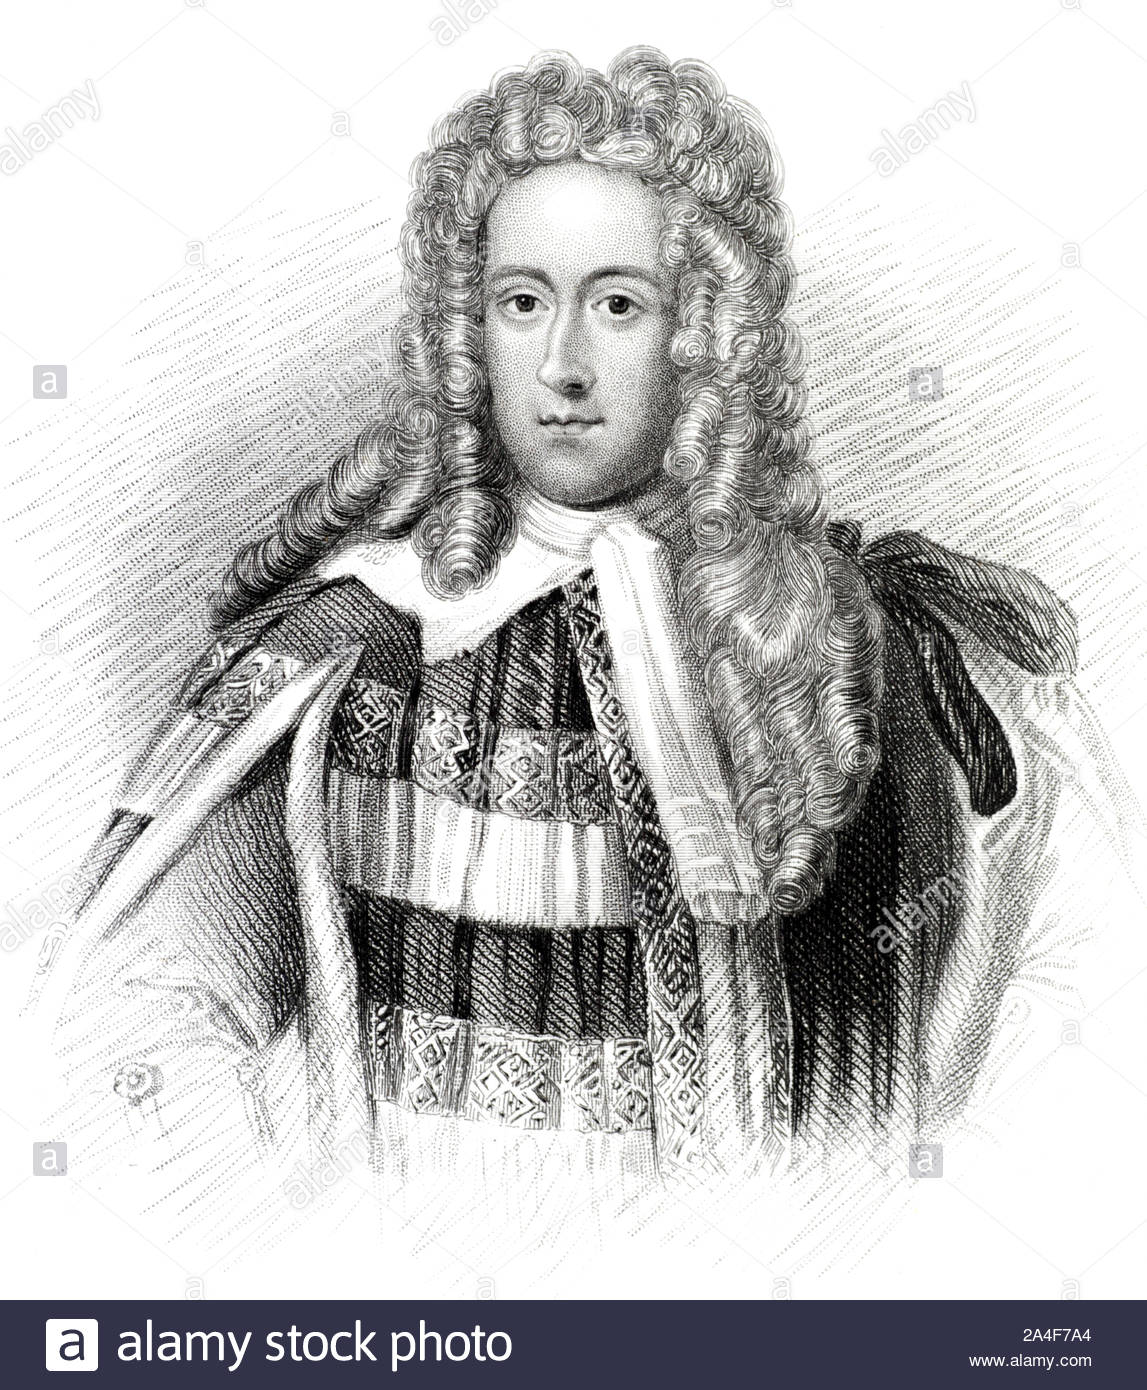 Henry St John portrait, 1st Viscount Bolingbroke, 1678 – 1751, was an English politician and political philosopher, vintage illustration from 1850 Stock Photo